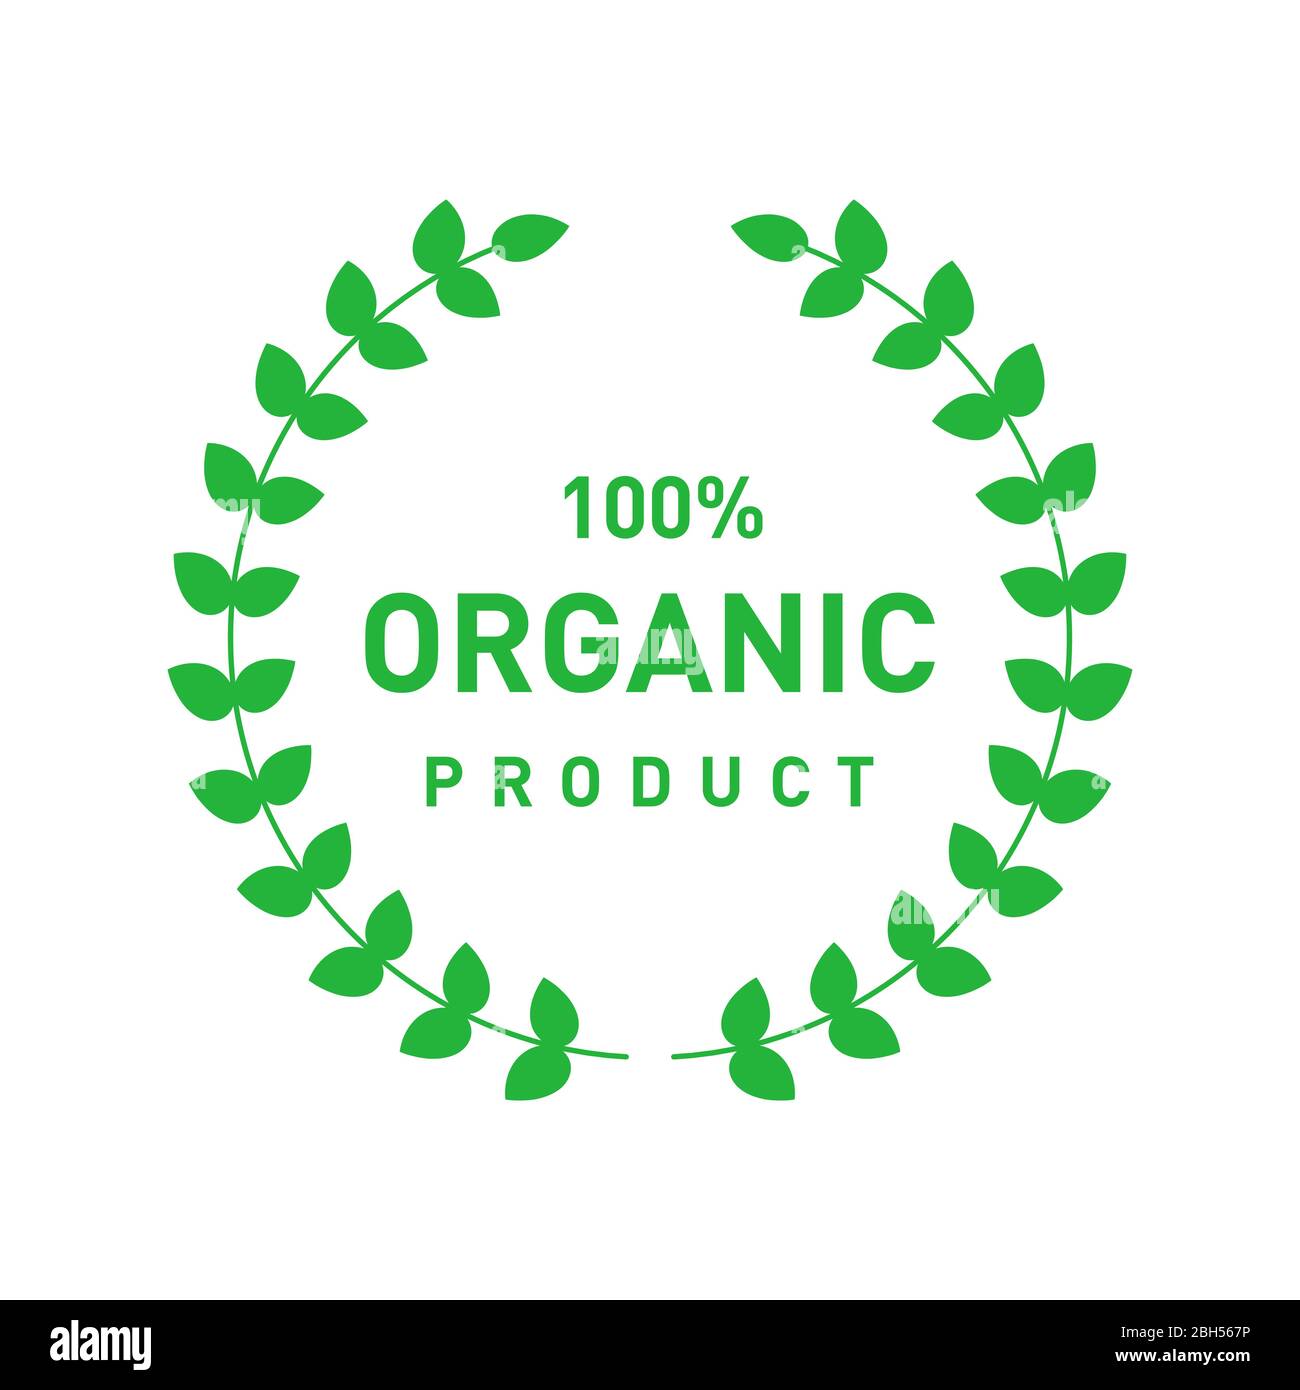 Organic 100 percent product circle badge with branch with leaves. Design element for packaging design and promotional material. Vector illustration. Stock Vector